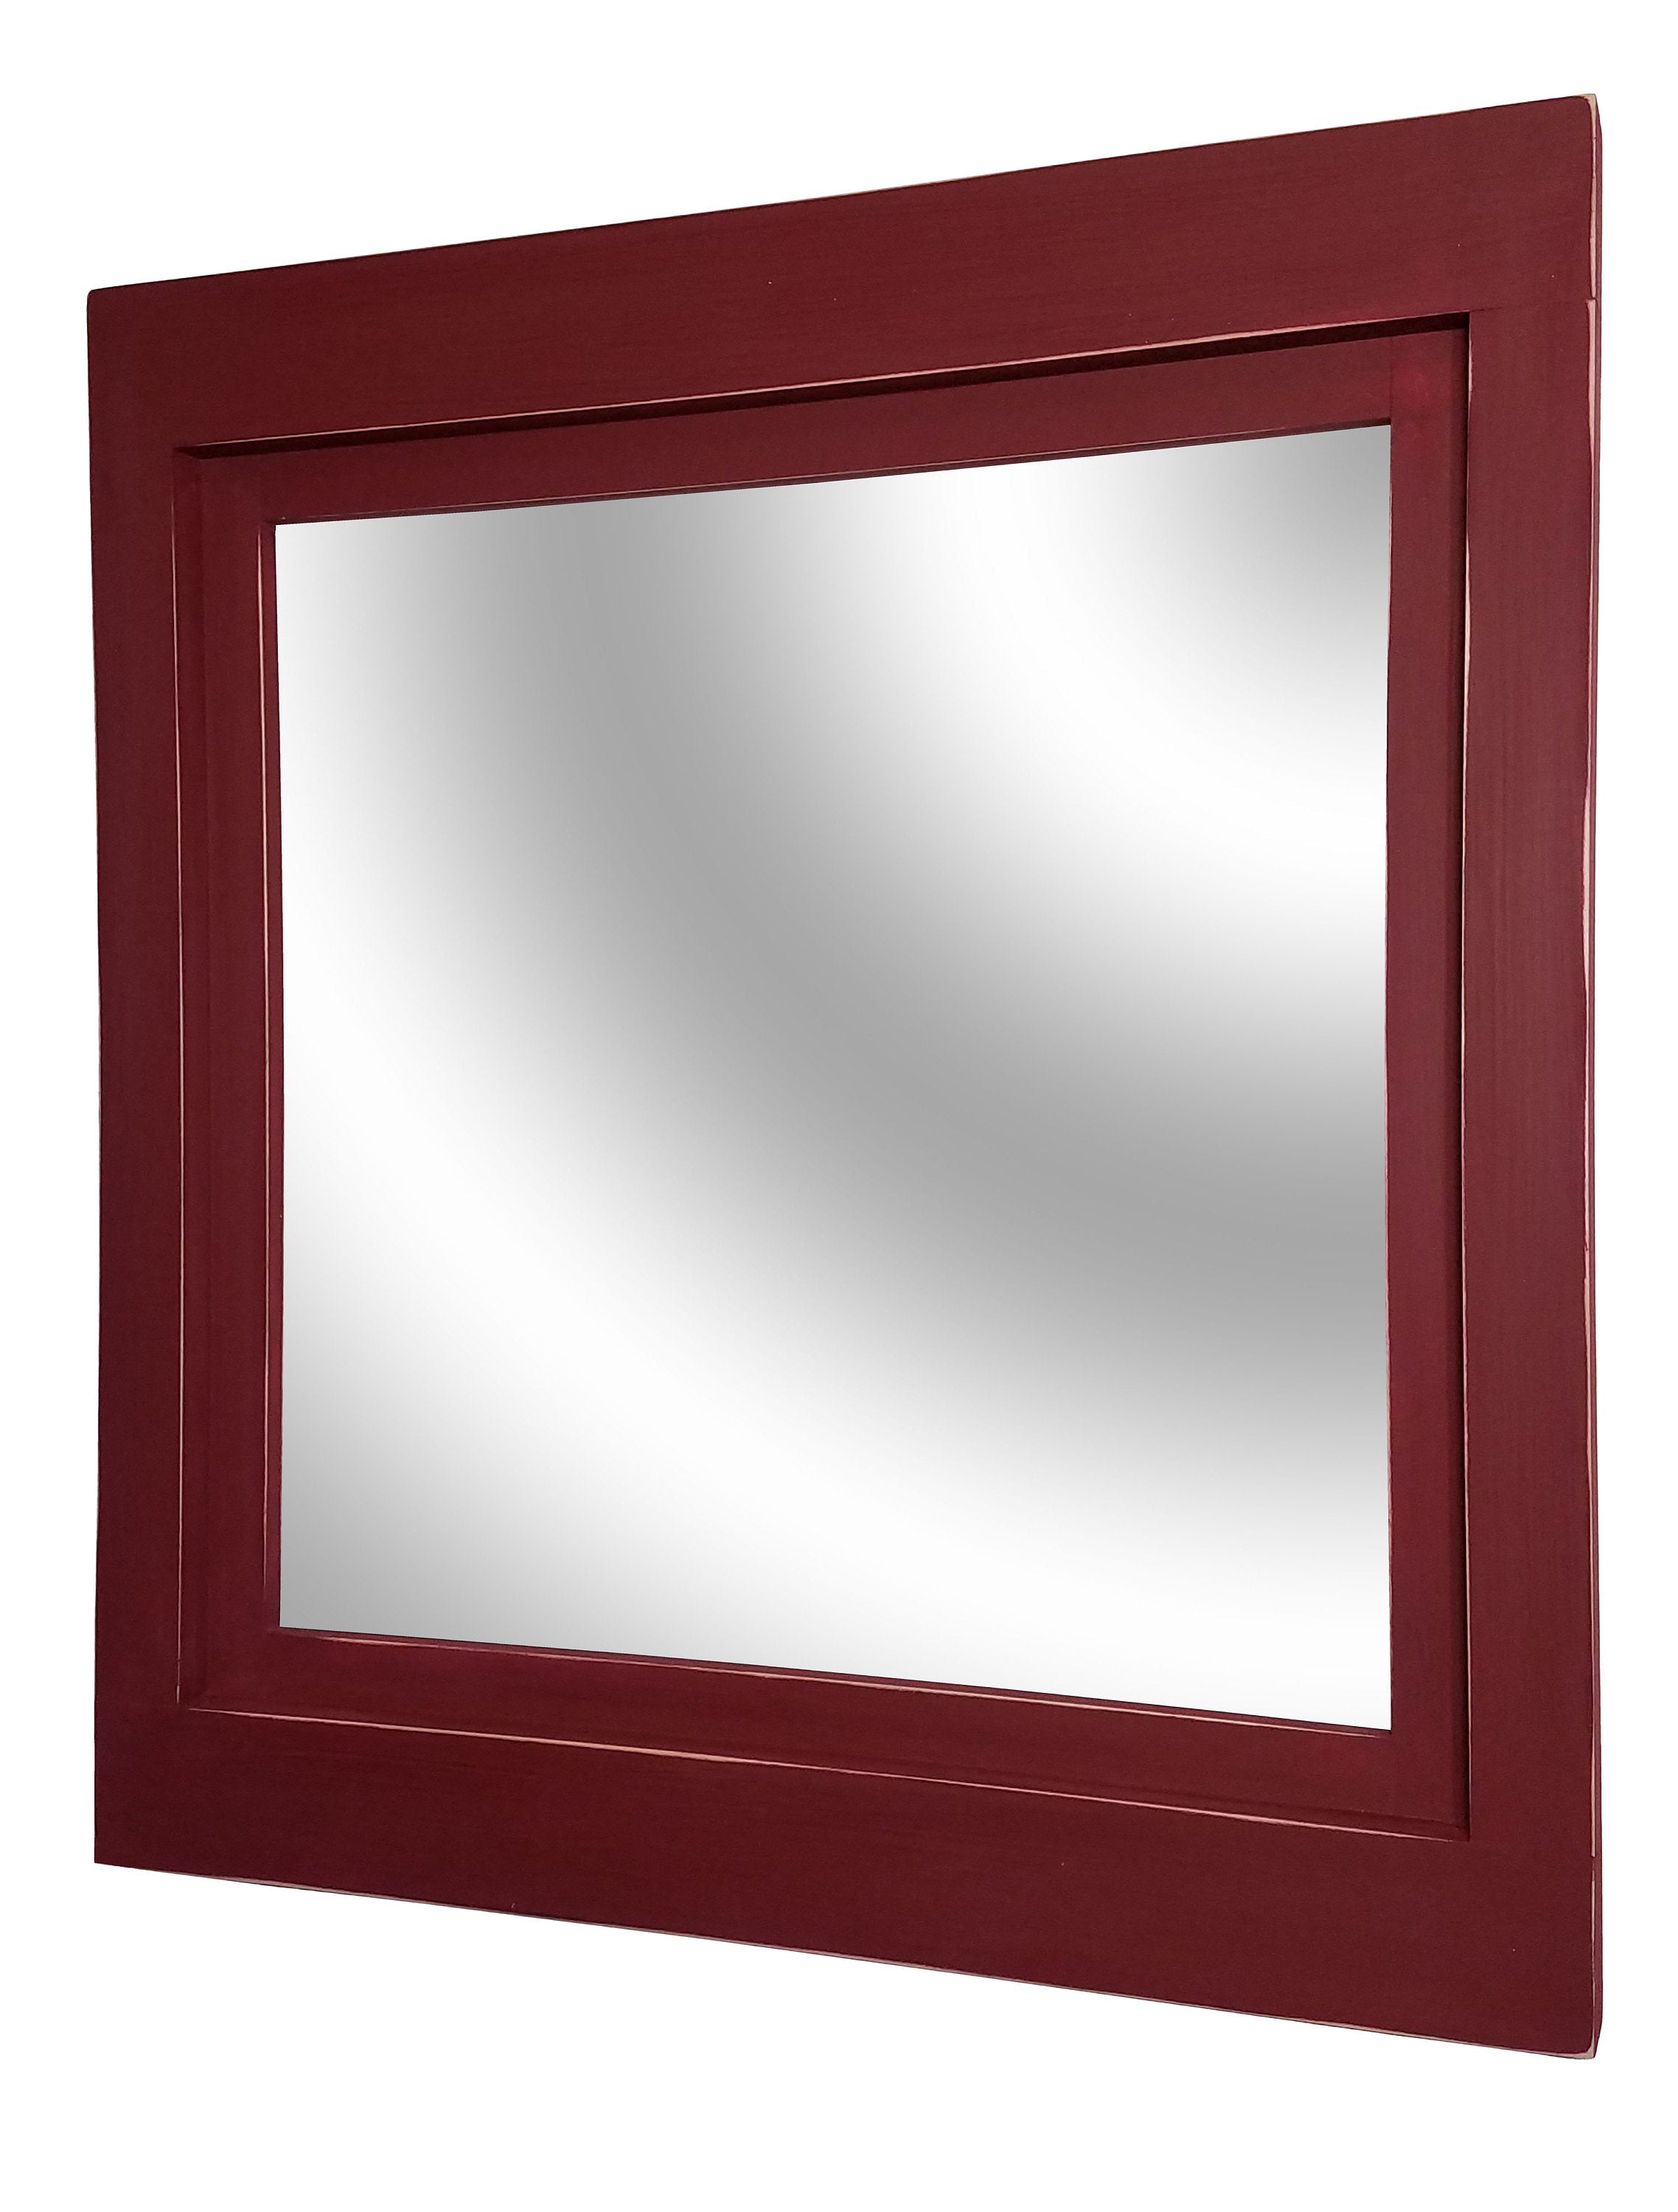 Farmhouse Wood Framed Wall Mirror, 5 Sizes & 20 Colors, Shown in Sundried Tomato Red